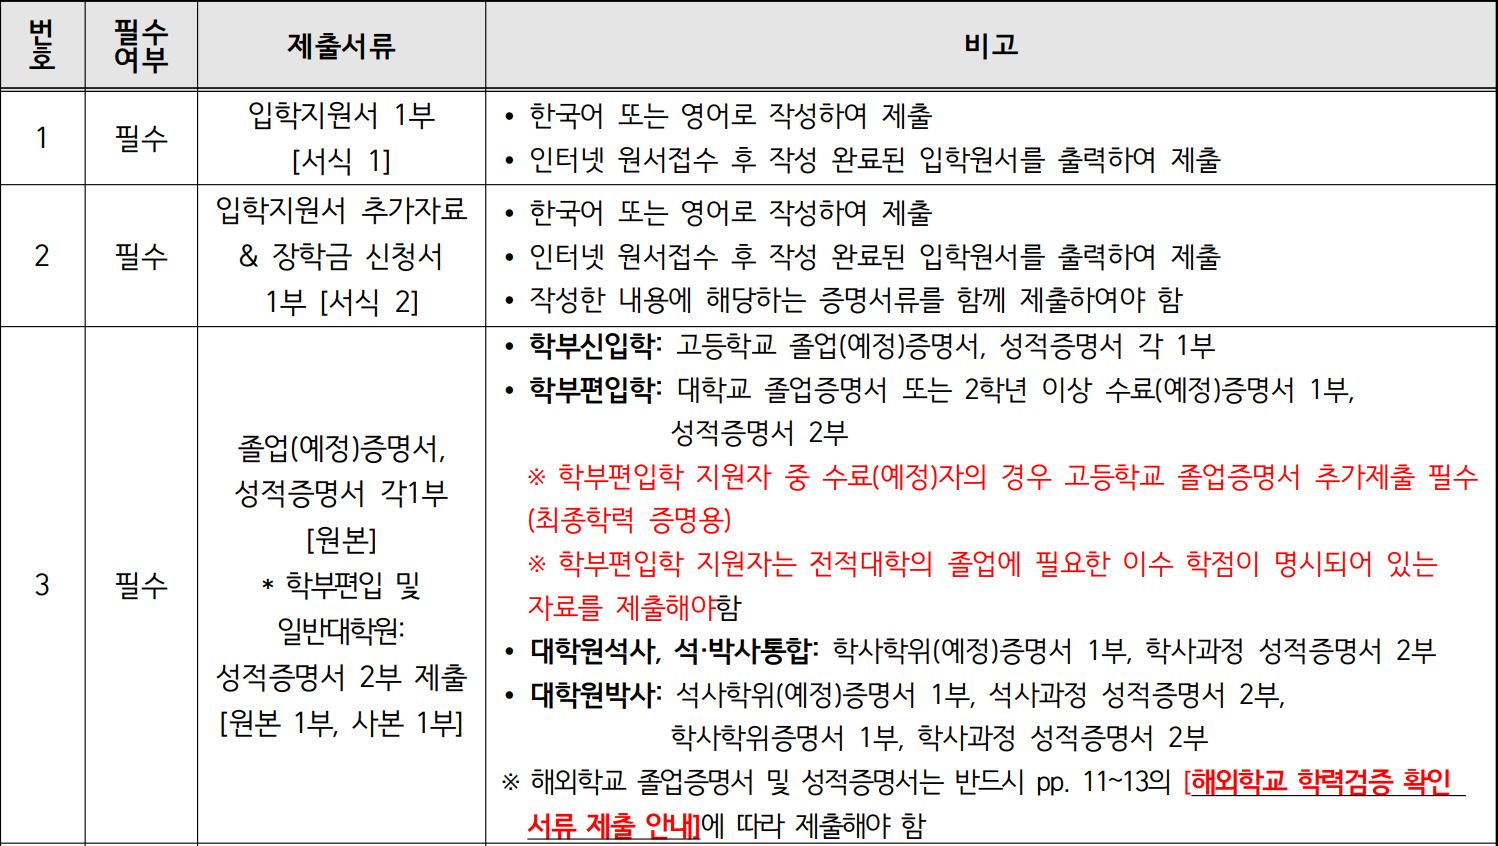 Ewha Womans University Foreign Student Admission Required Documents_English Version 이화여대 외국인전형 제출서류_영어본_01_제출서류.JPG